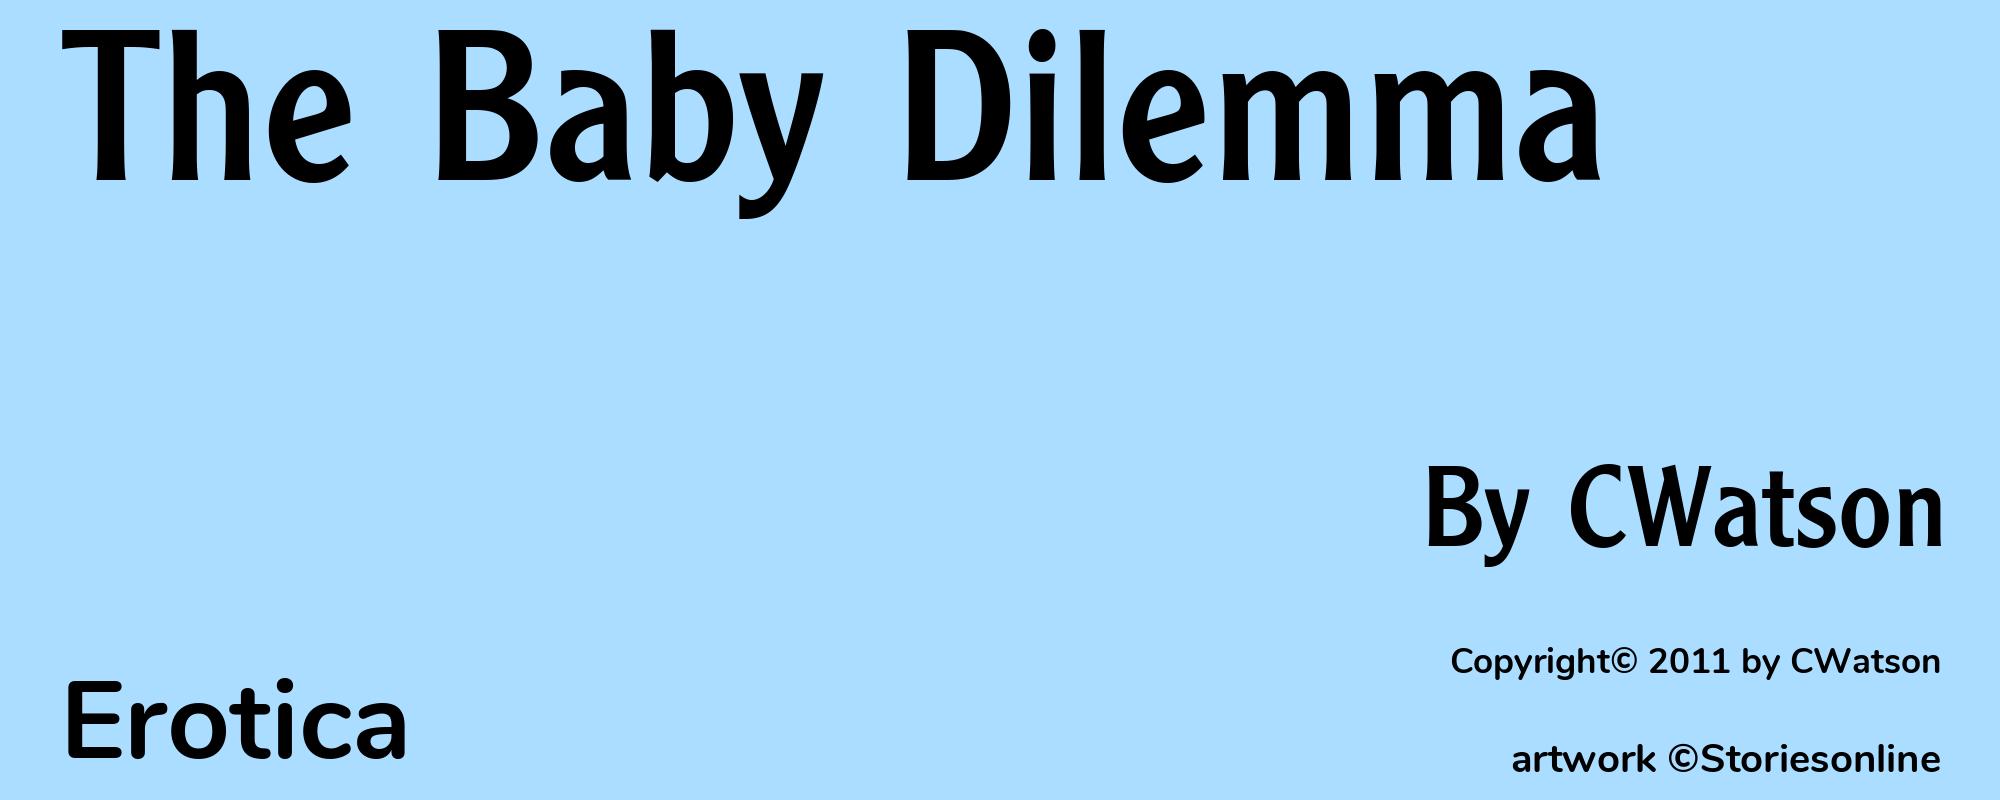 The Baby Dilemma - Cover